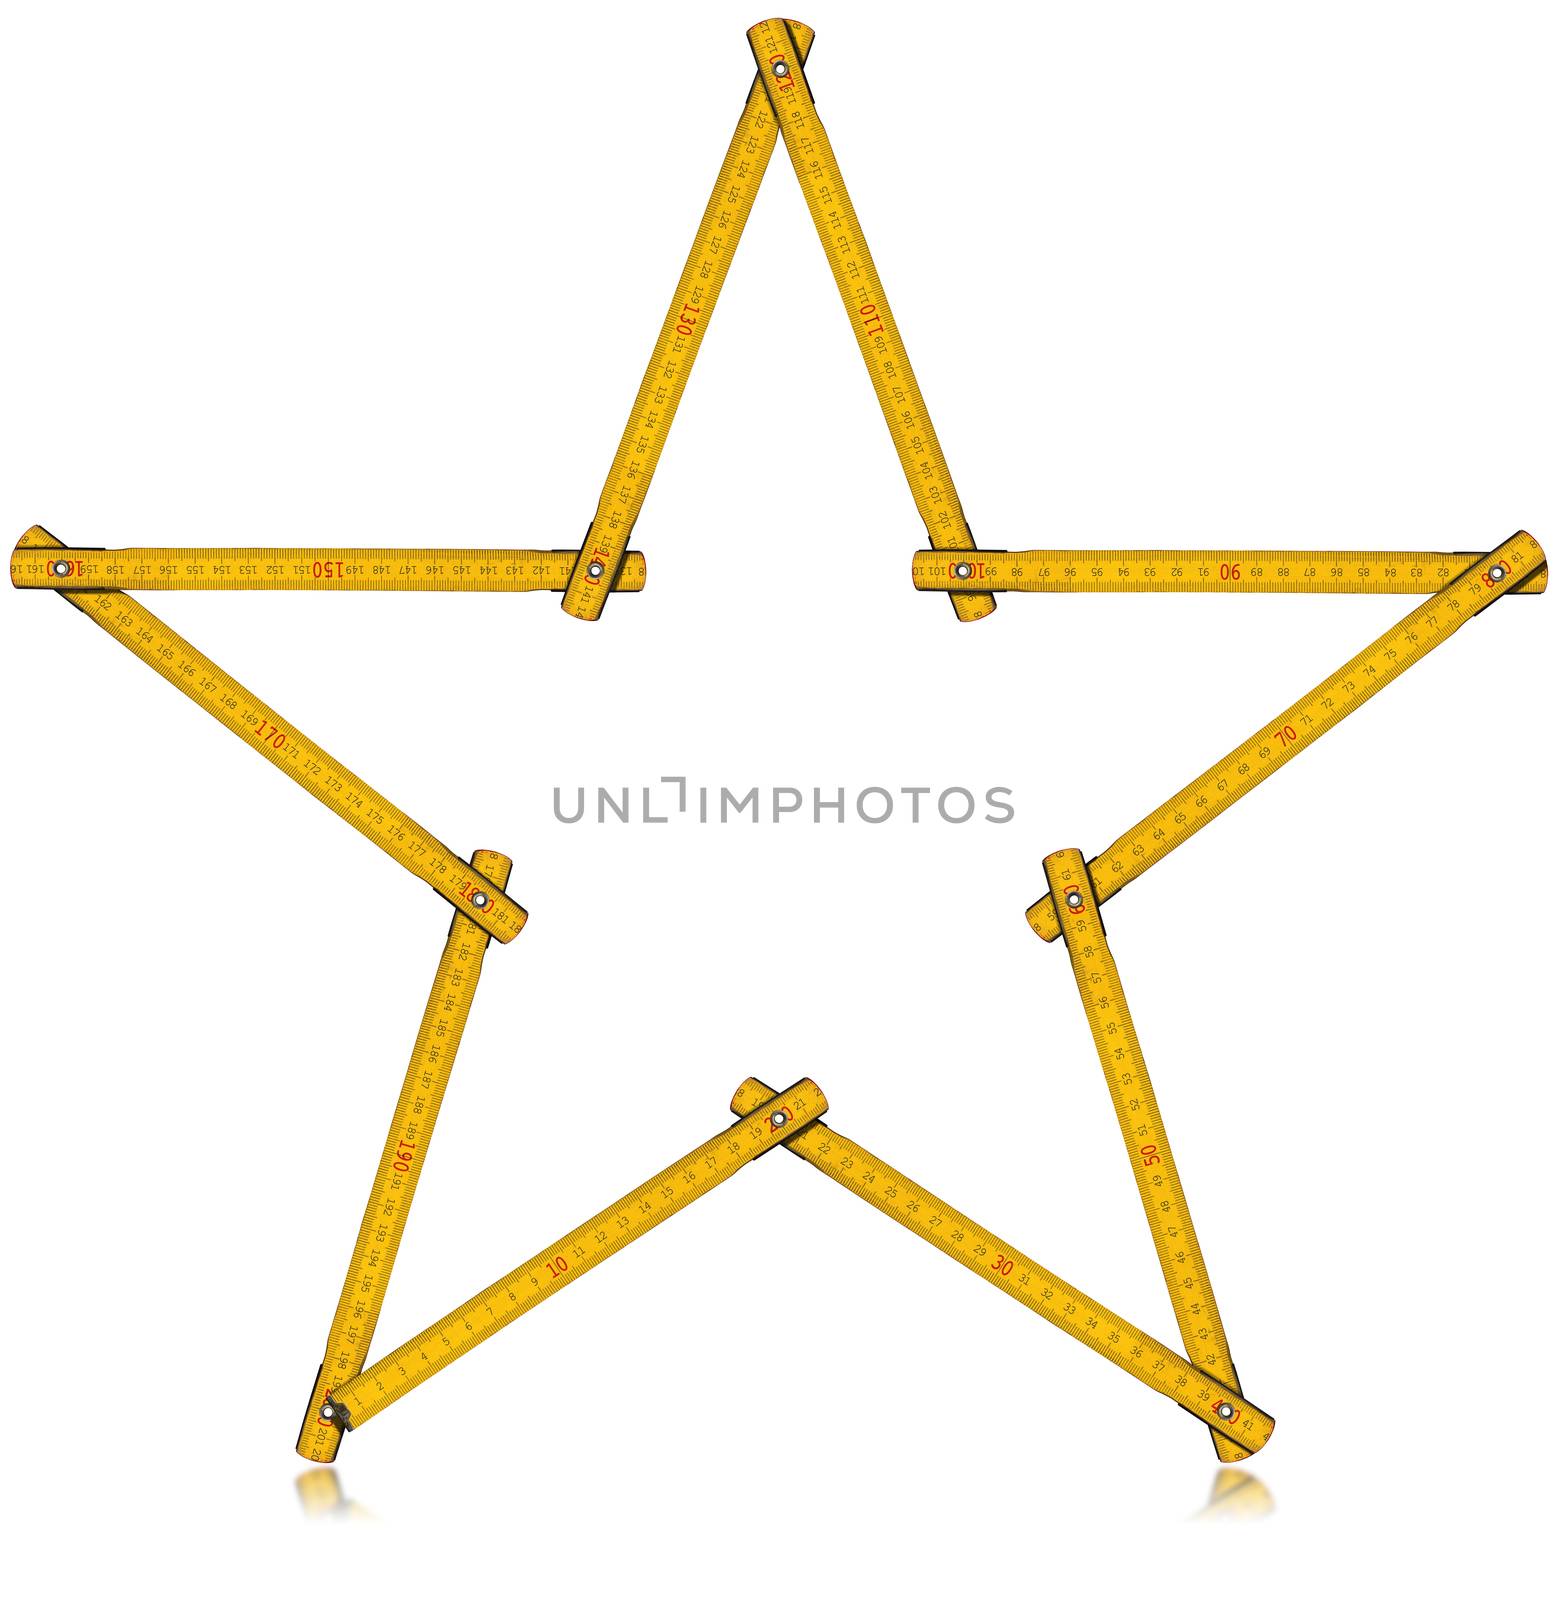 Old wooden yellow meter in the shape of five-pointed star. Isolated on white background.